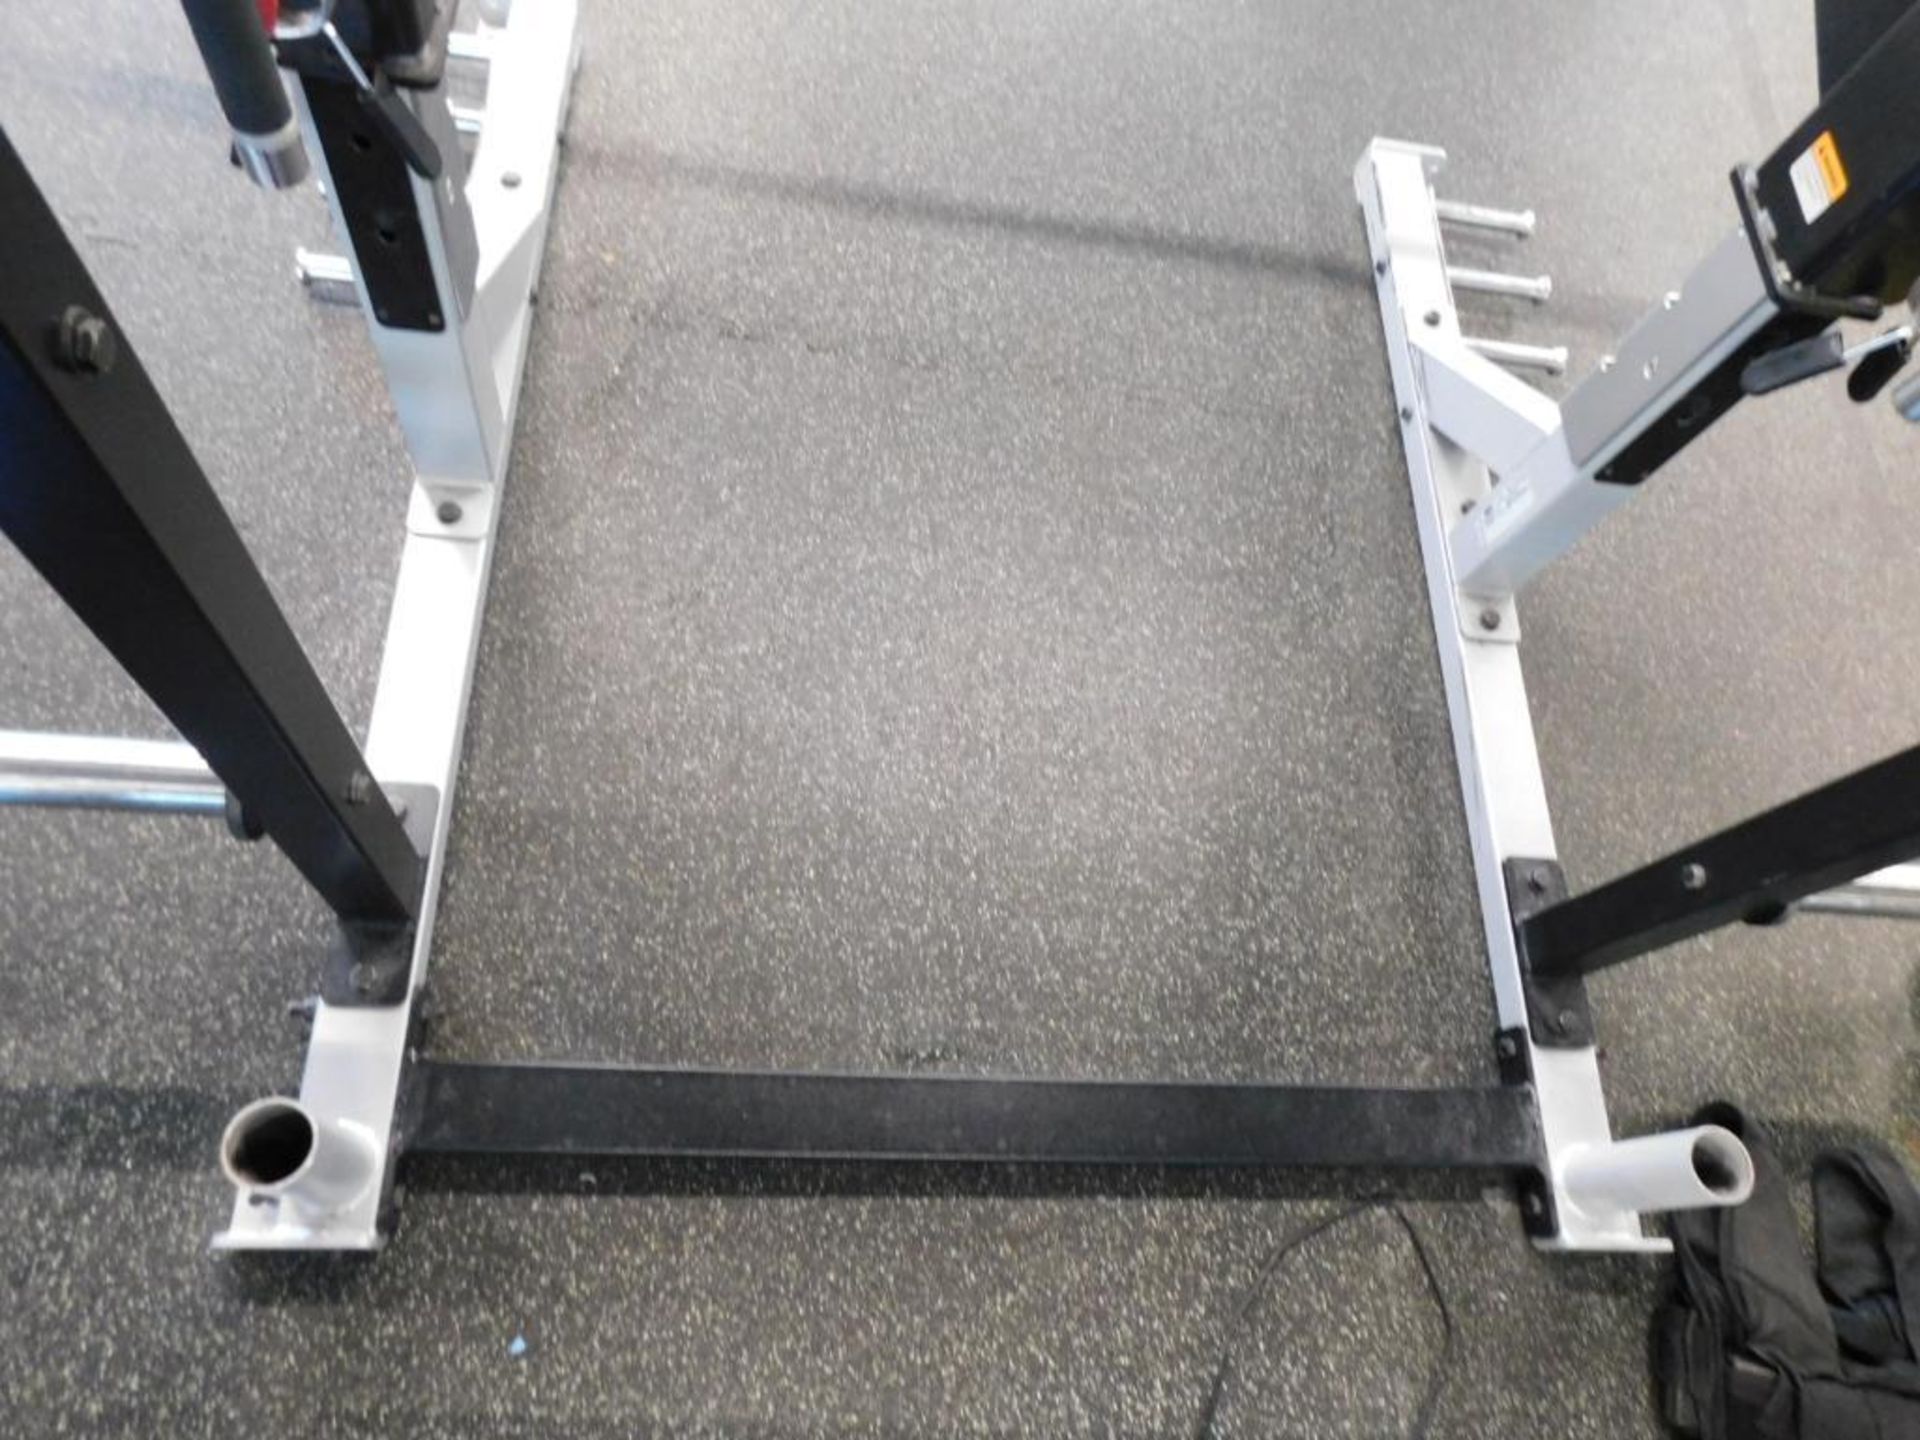 PB Extreme Half Rack w/Weight Storage, Safety Spot Arms, Bar Holders, Hook Plates, Knurled P-Grip Pu - Image 7 of 9